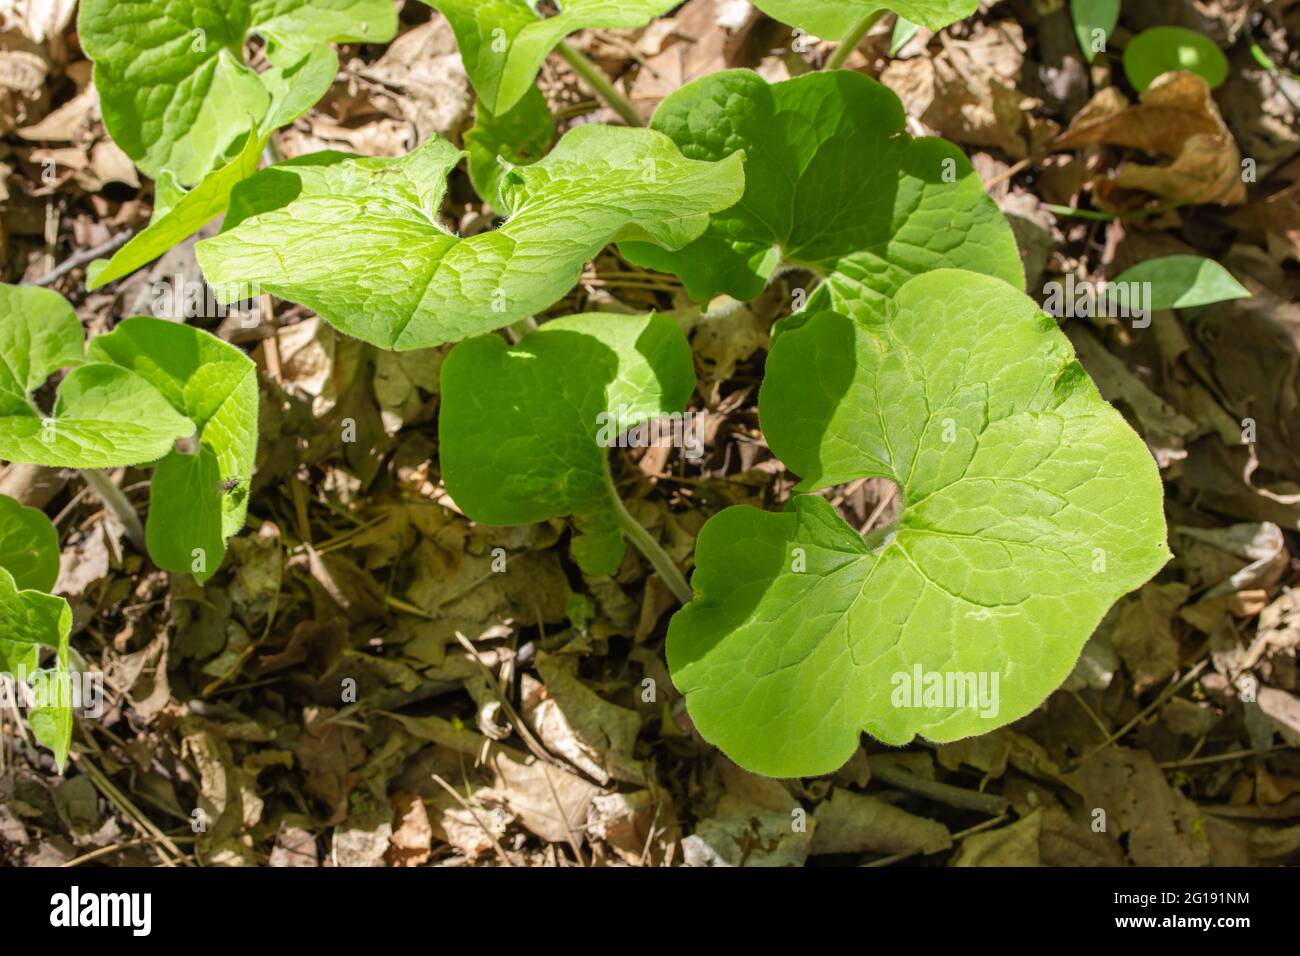 Full frame texture background view of a patch of uncultivated Canada wild ginger (Asarum canadense) plants, growing in its native woodland setting Stock Photo